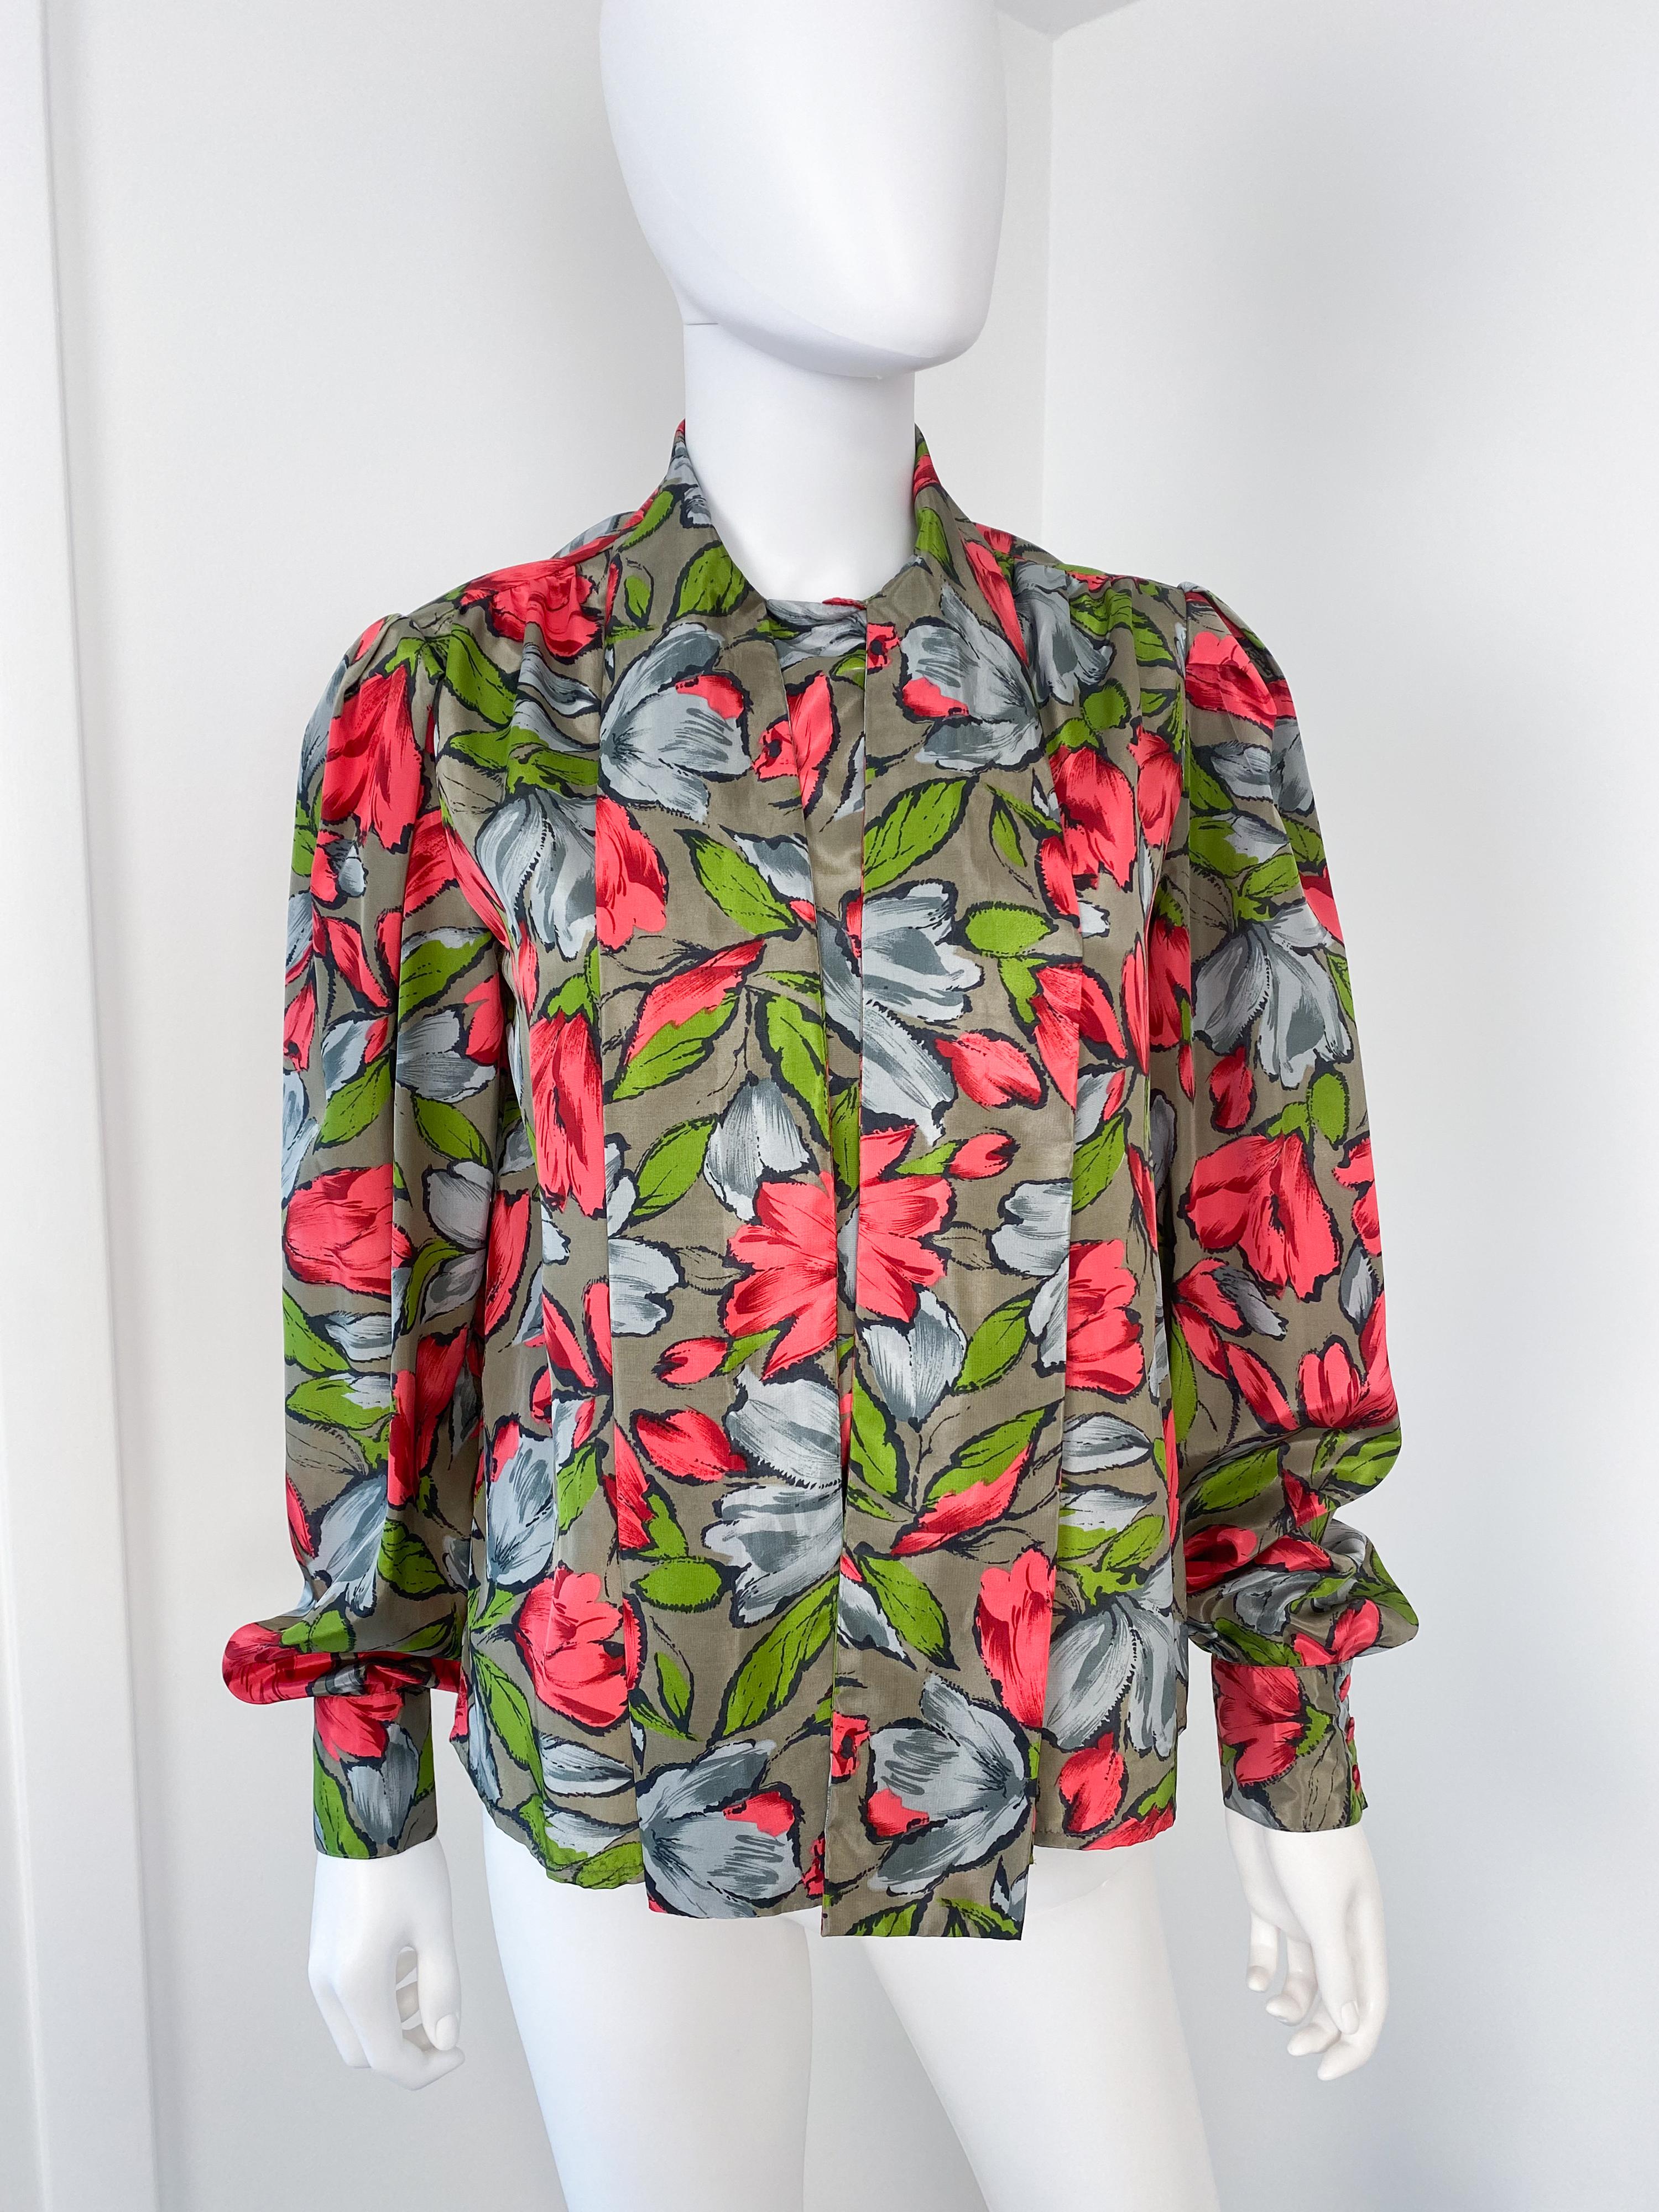 Vintage 1980s Silky Polyester Blouse Top Red and Gray Flowers Size 8/10 In Excellent Condition For Sale In Atlanta, GA